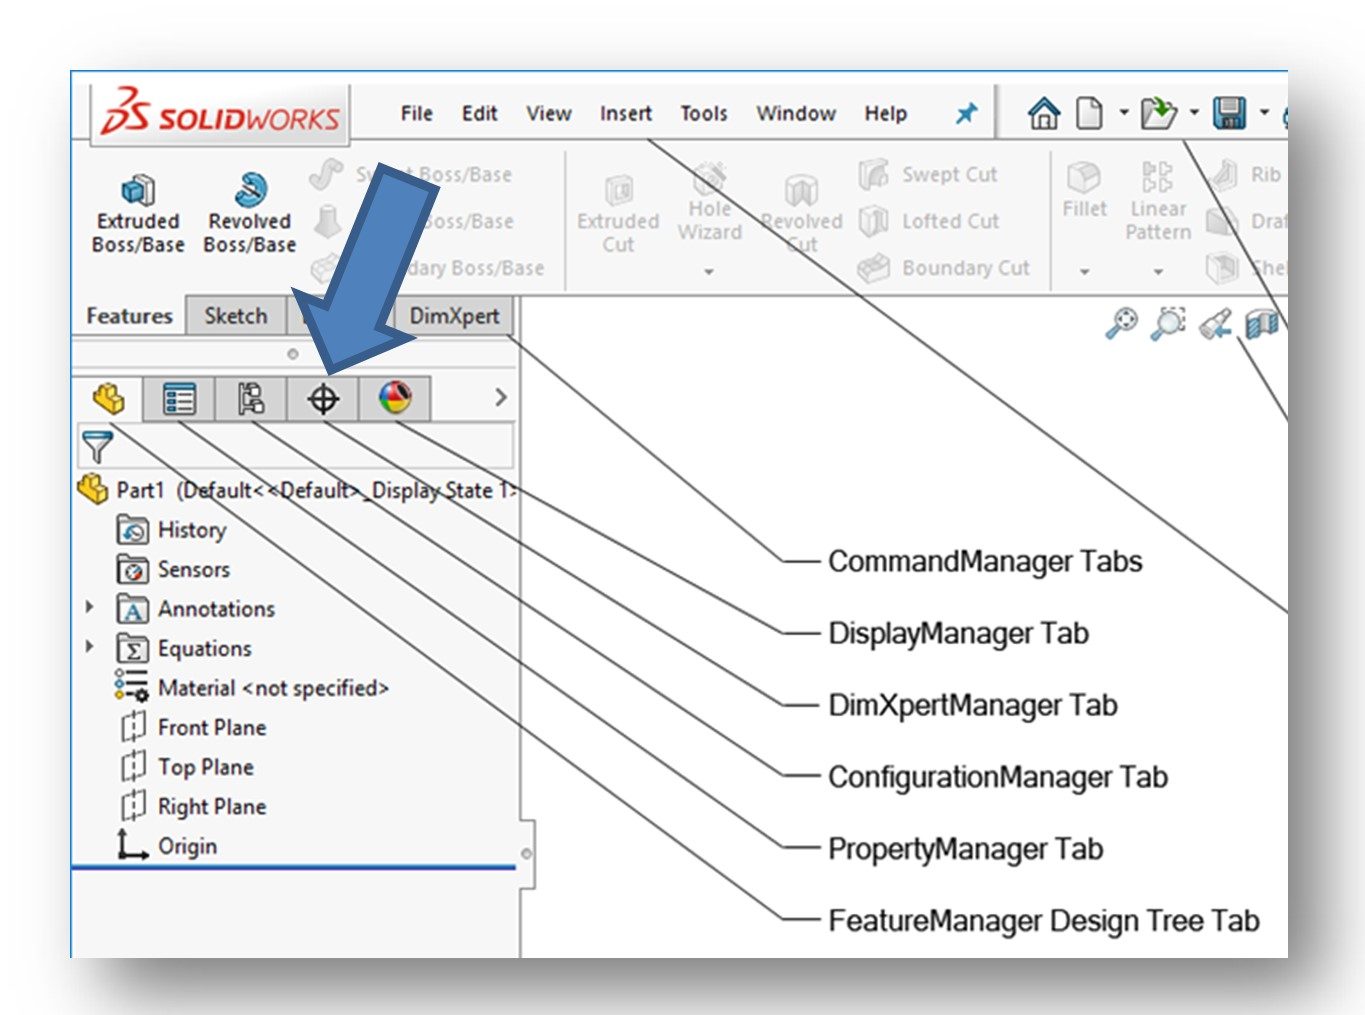 ConfigurationManager in FeatureManager Design-Tree